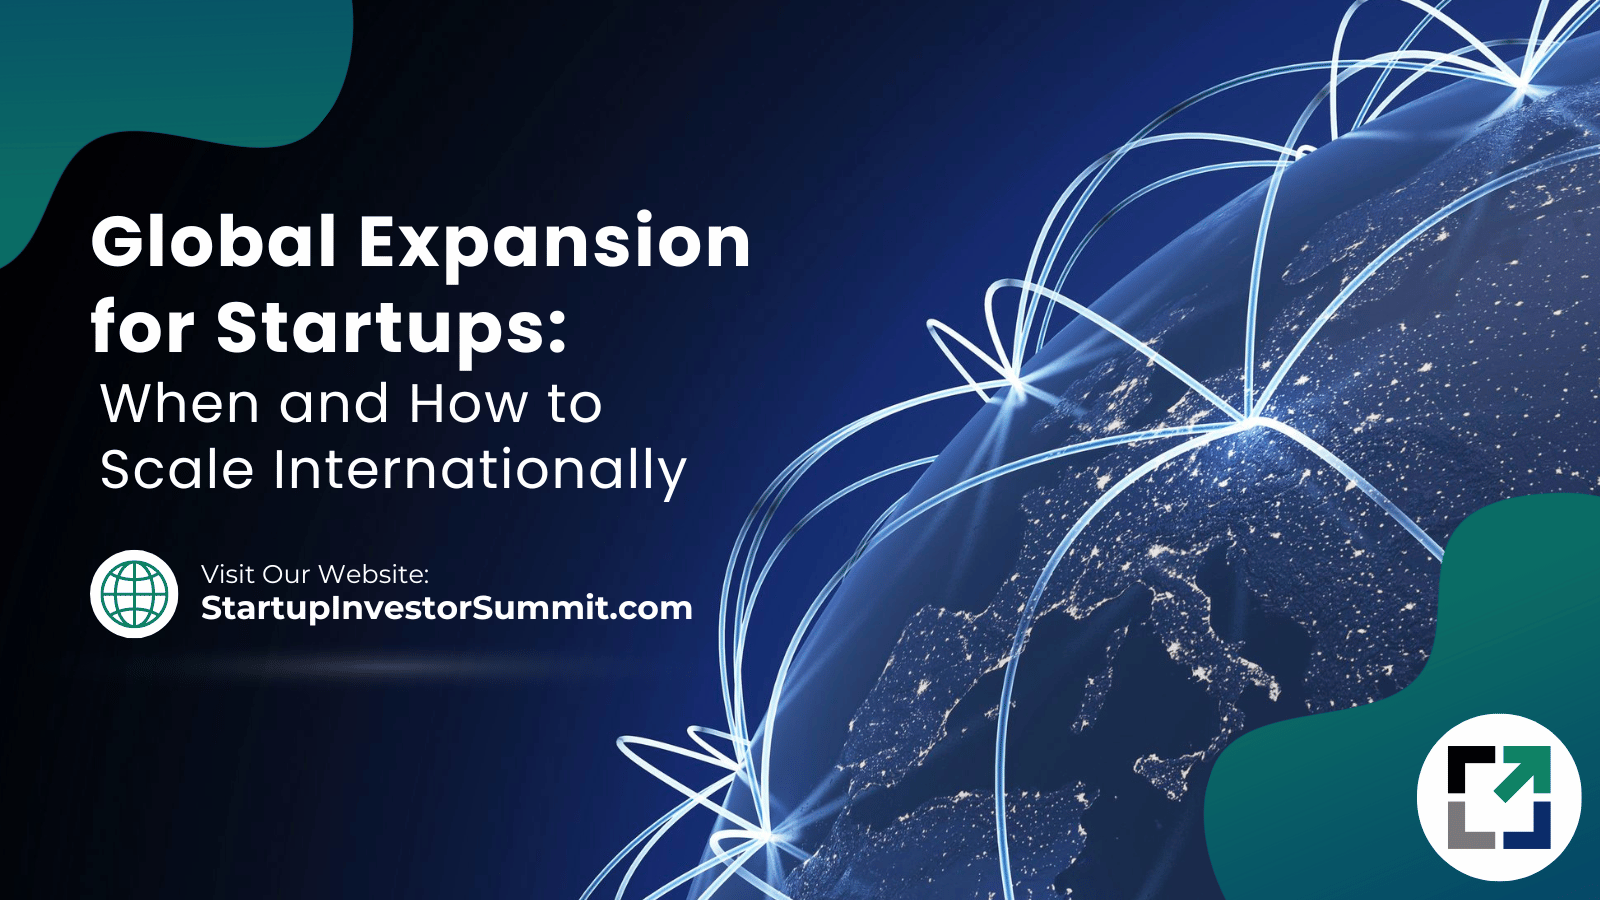 Global Expansion for Startups: When and How to Scale Internationally